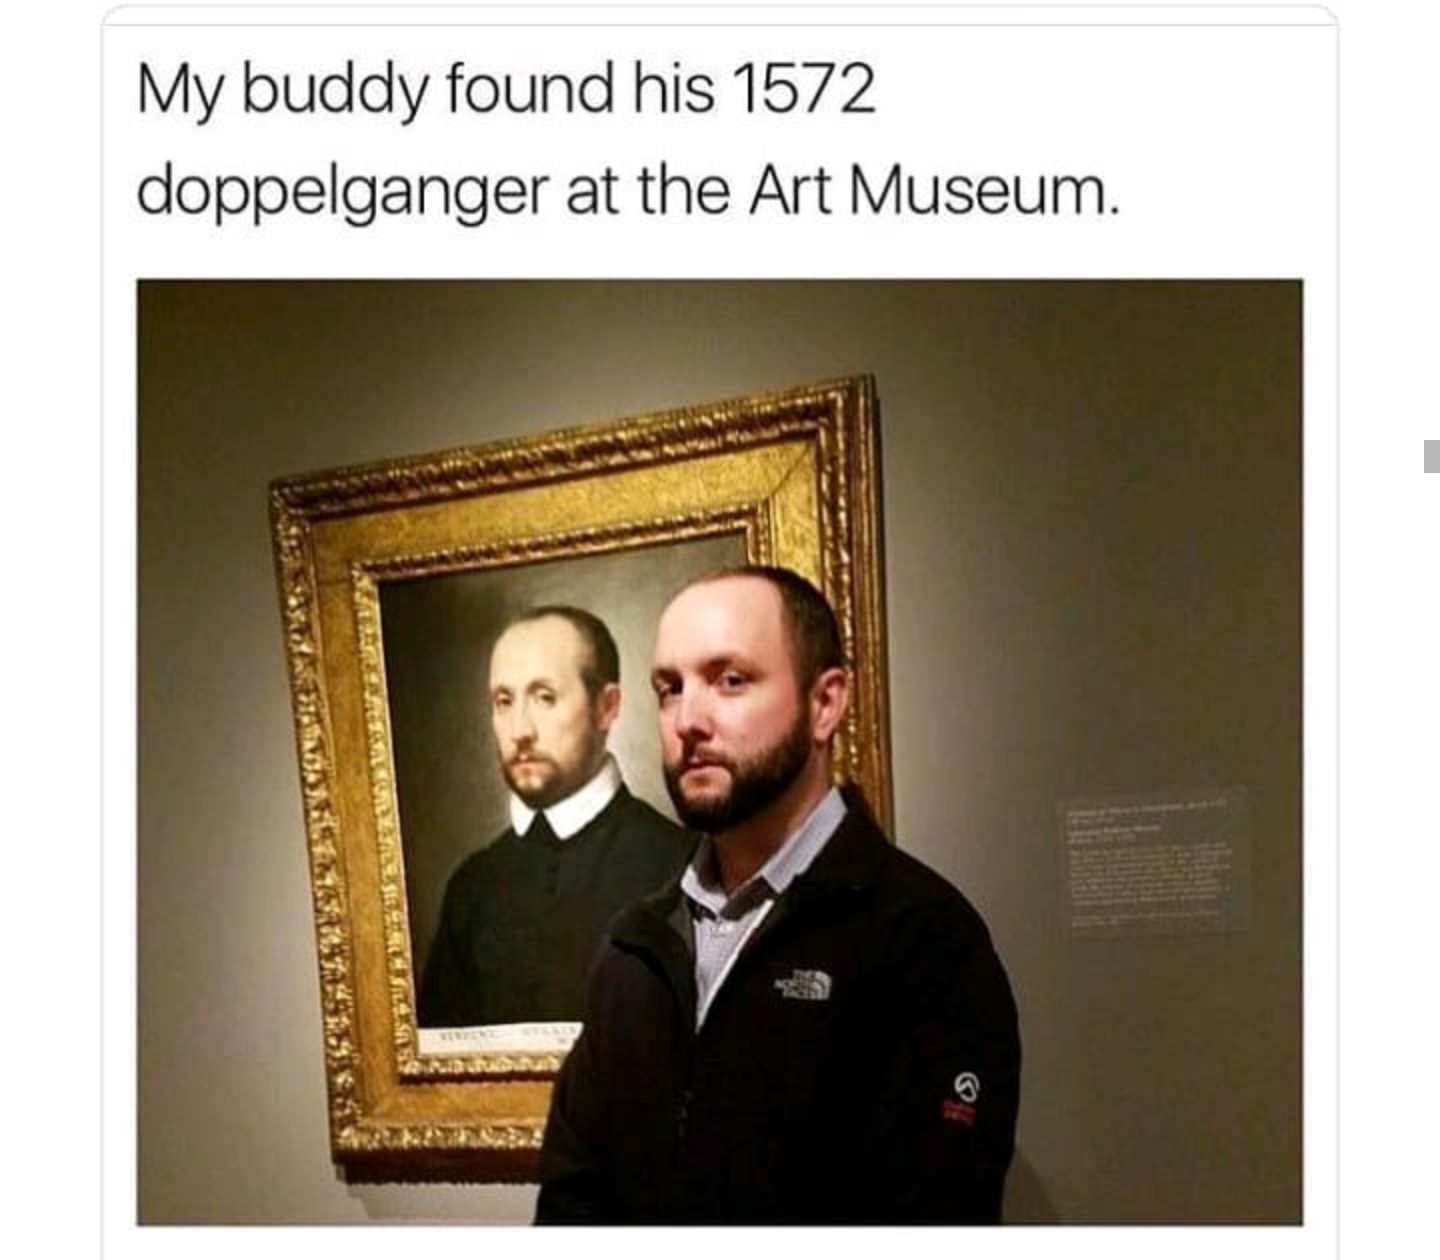 My buddy found his 1572 doppelganger at the Art Museum.